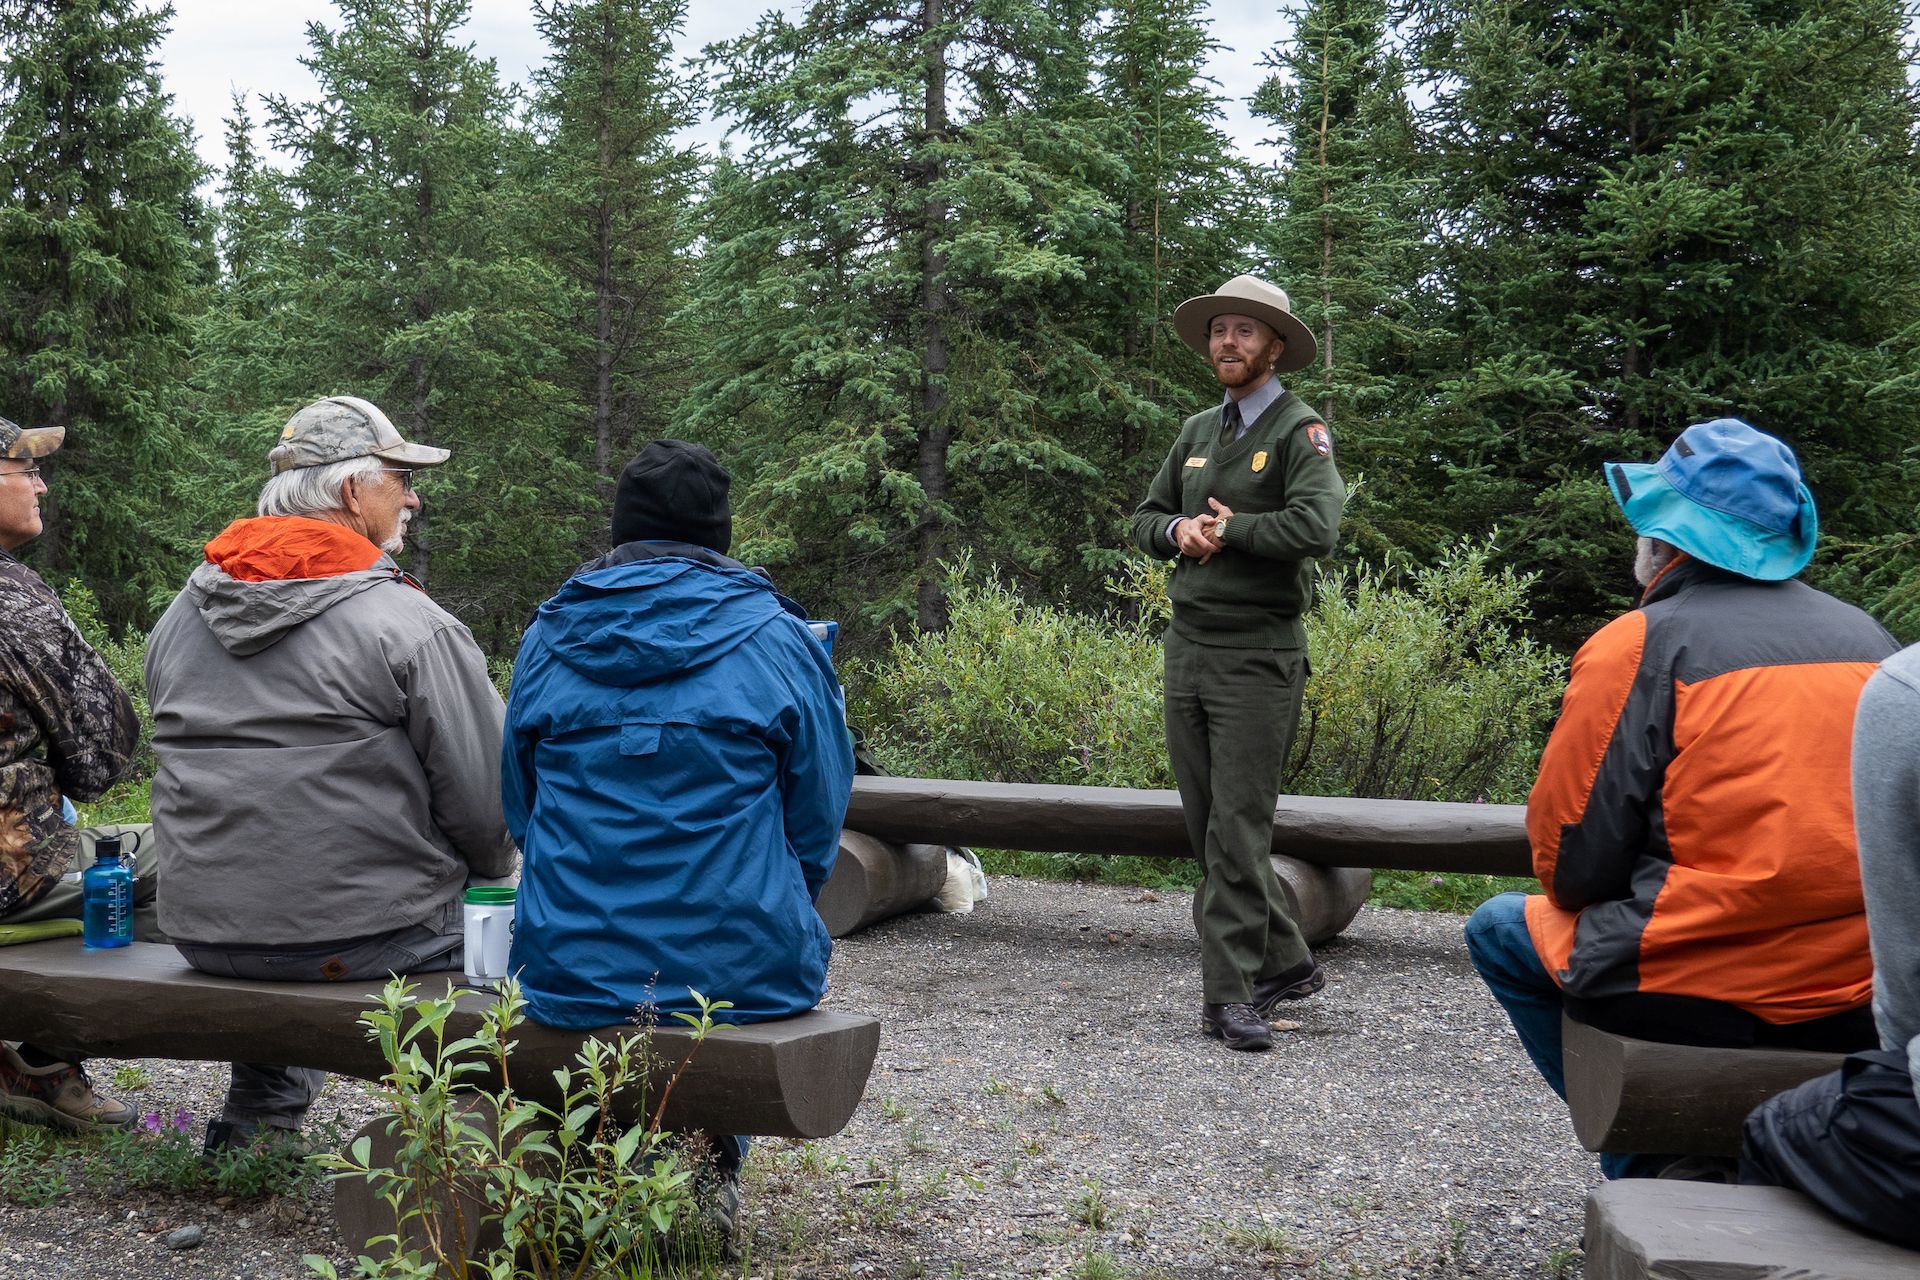 We attended our first ranger-led program ever in the national park! Thank you, Ranger Damian, for a fun and informative talk about the mammals in Denali National Park.